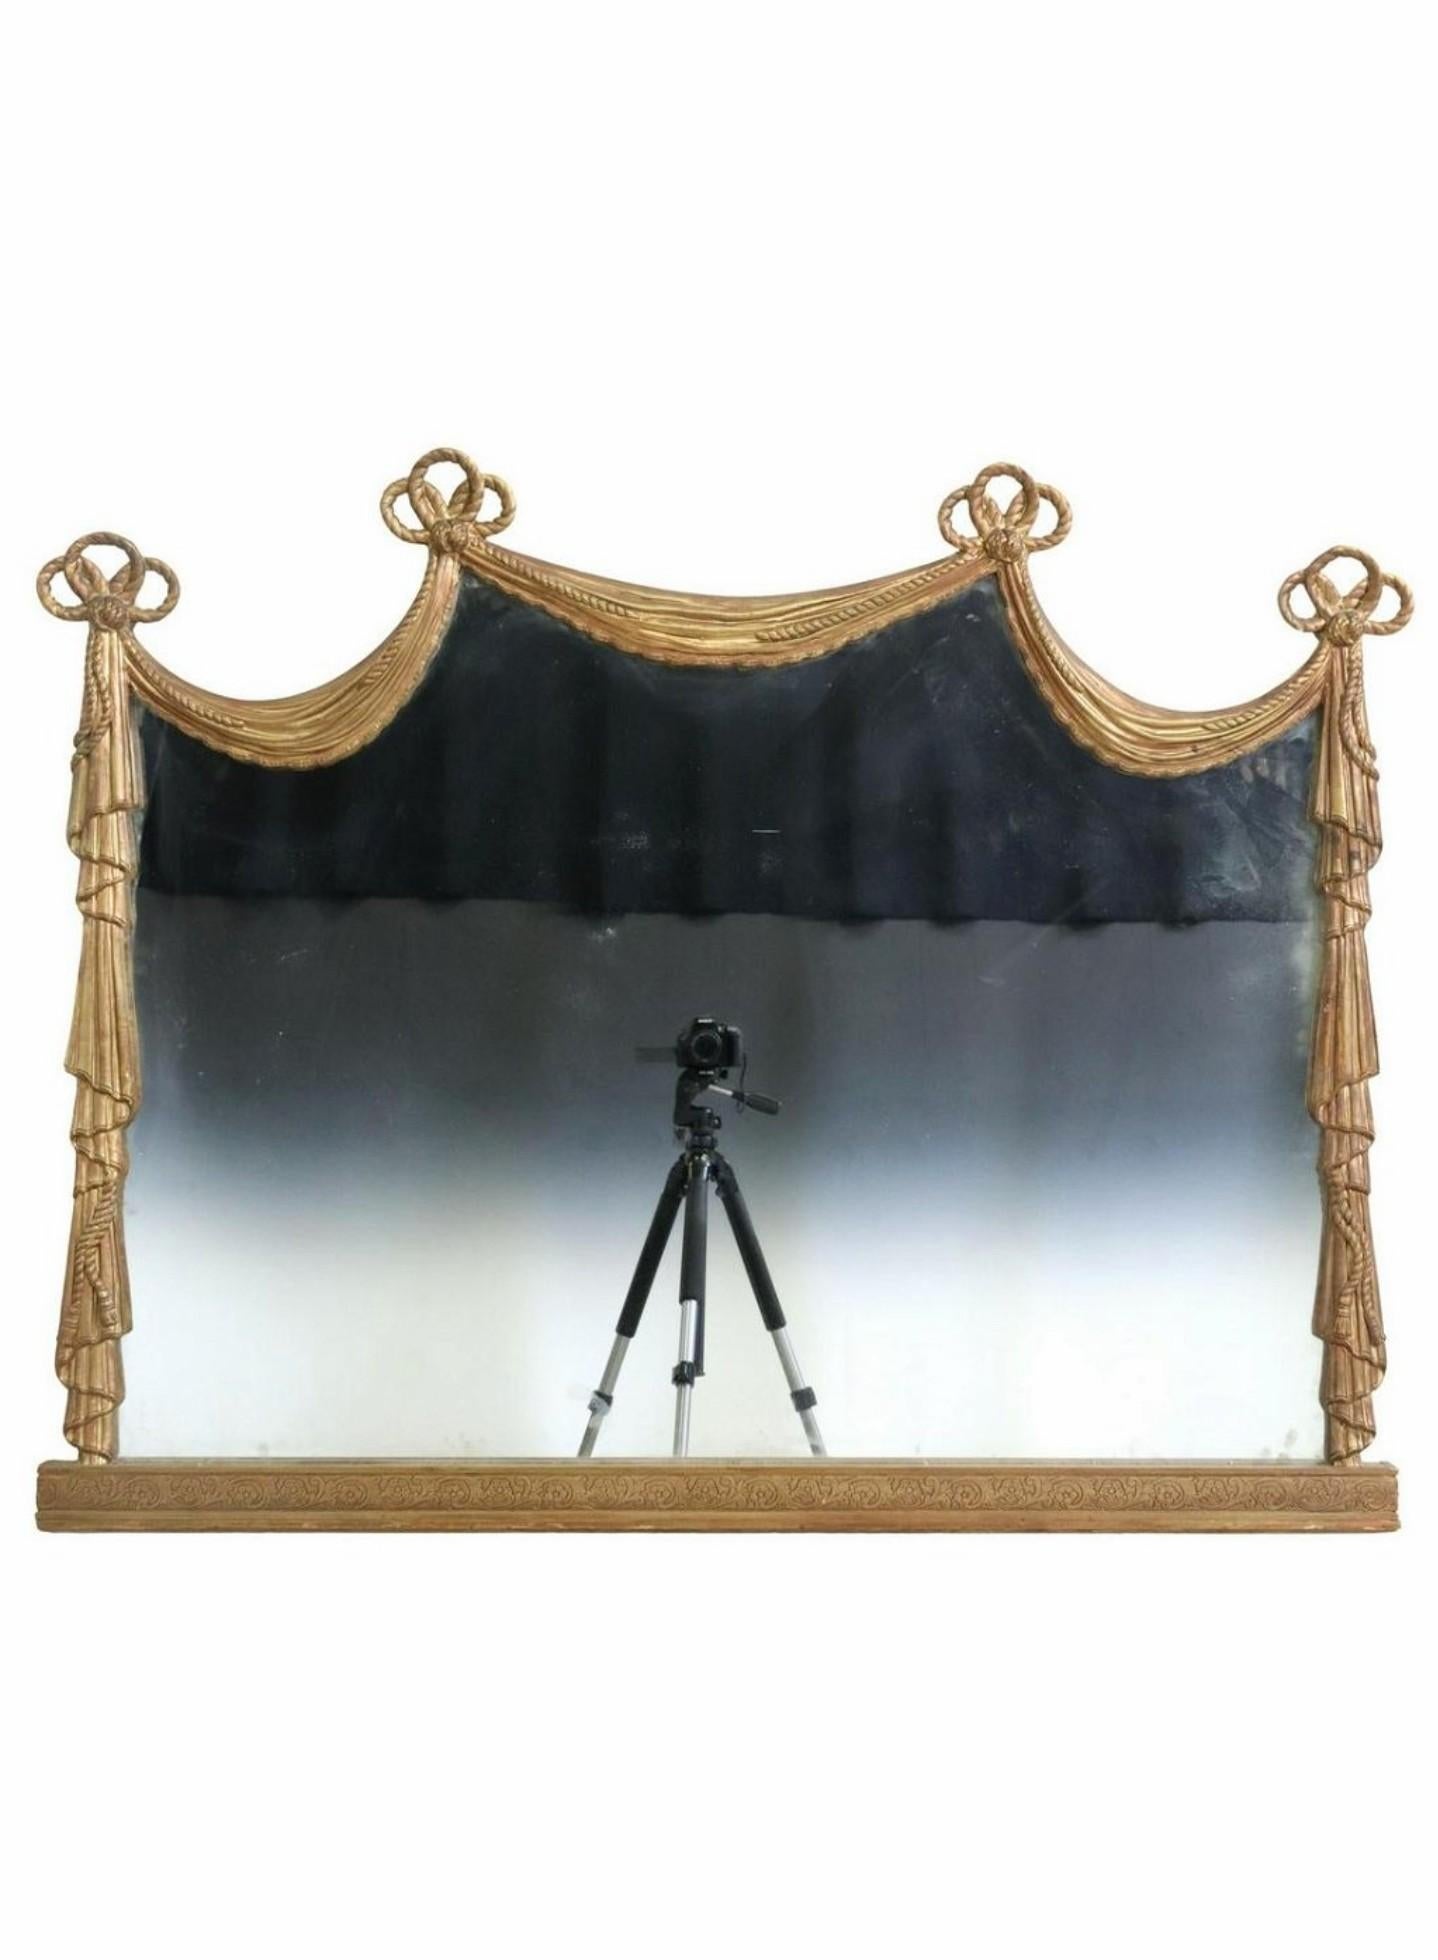 A stunning antique Italian Neoclassical Revival giltwood wall mirror / fireplace mantle mirror. circa 1900

Late 19th / early 20th century, exceptionally executed architectural window curtain frame shaped mirror, having a sculptural gilt painted